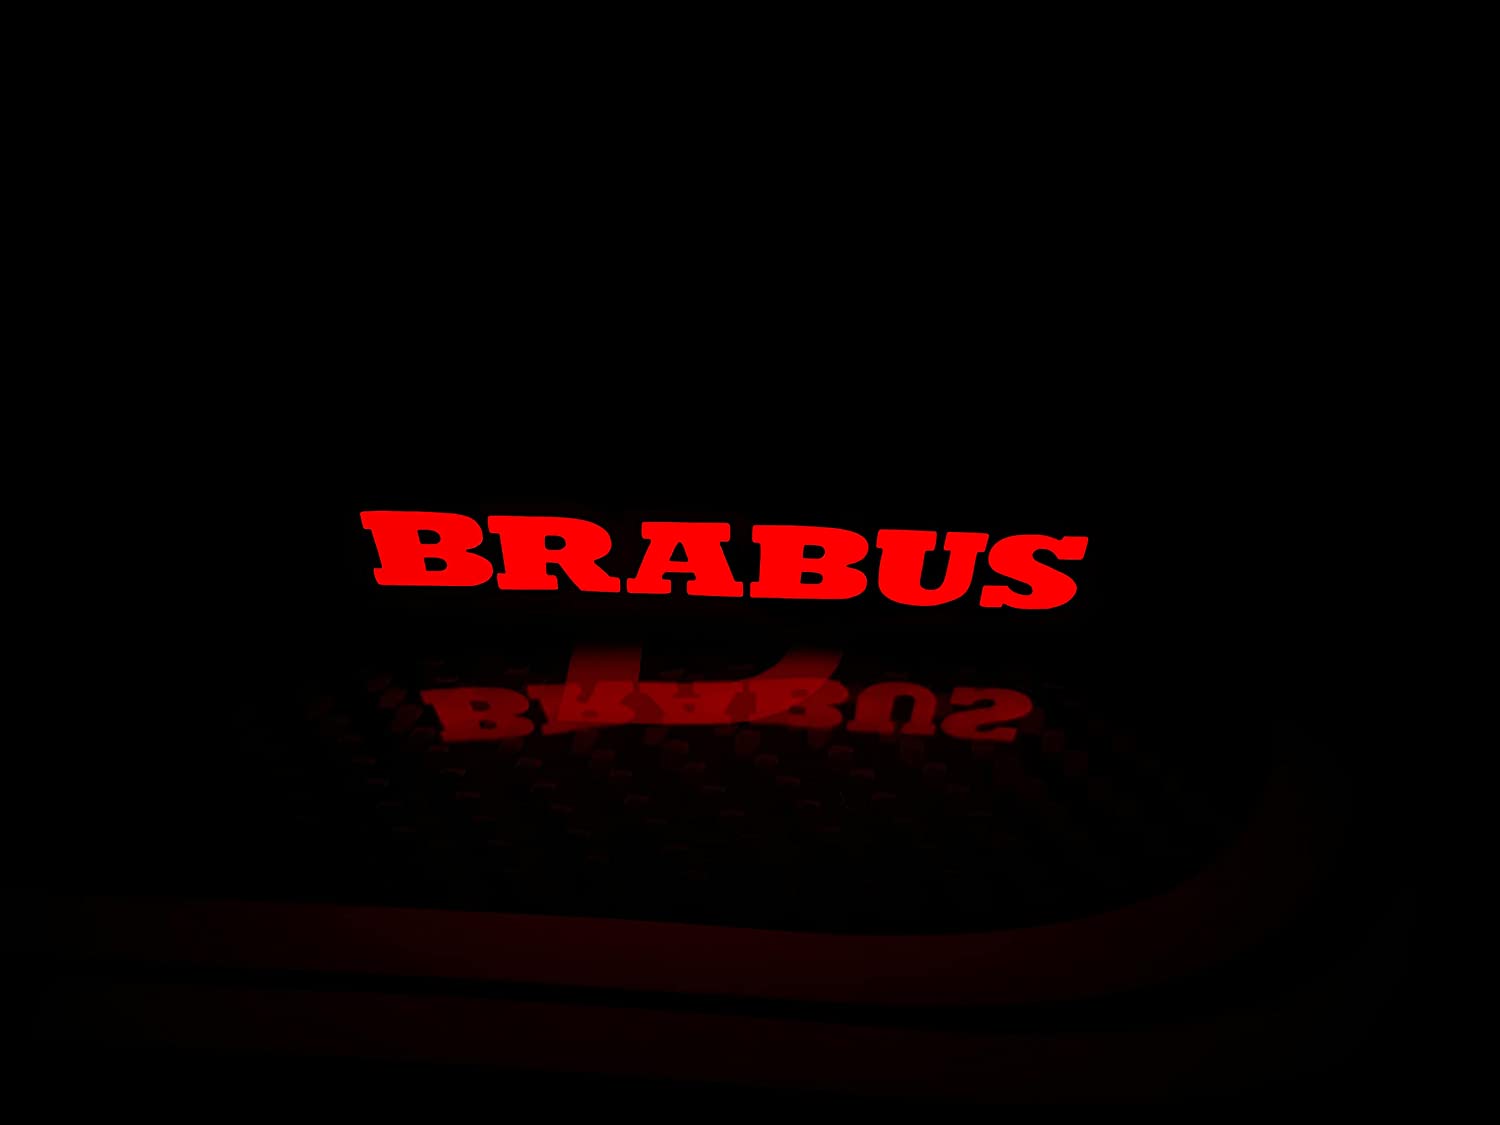 https://kubaycarboncompany.net/cdn/shop/products/brabus-style-front-grille-red-led-illuminated-logo-badge-emblem-for-mercedes-benz-g-wagon-g-class-w463-w463a-w464-191081_2048x2048.jpg?v=1708528891